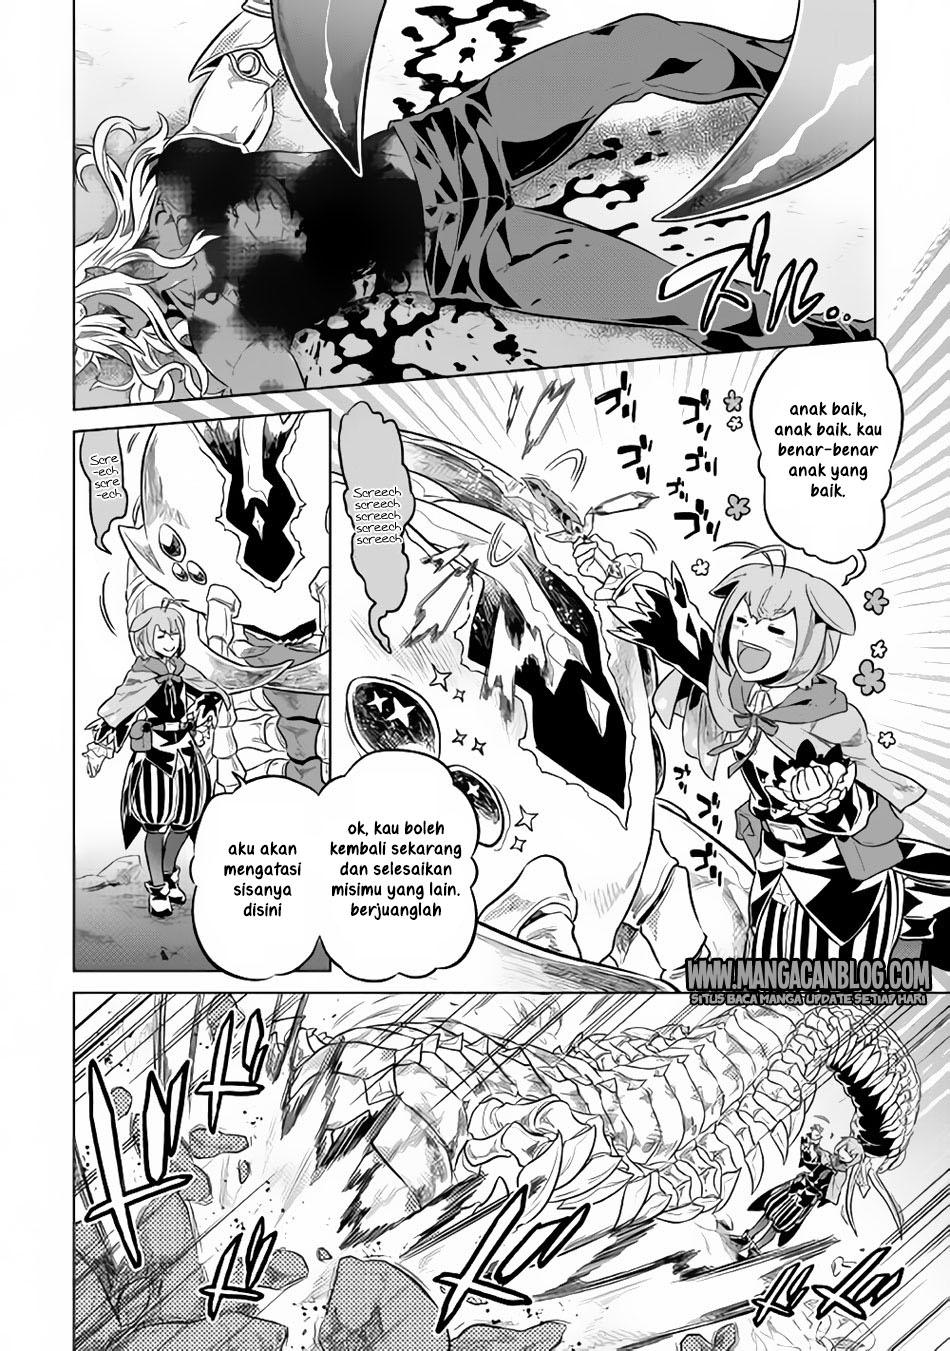 Re:Monster Chapter 33